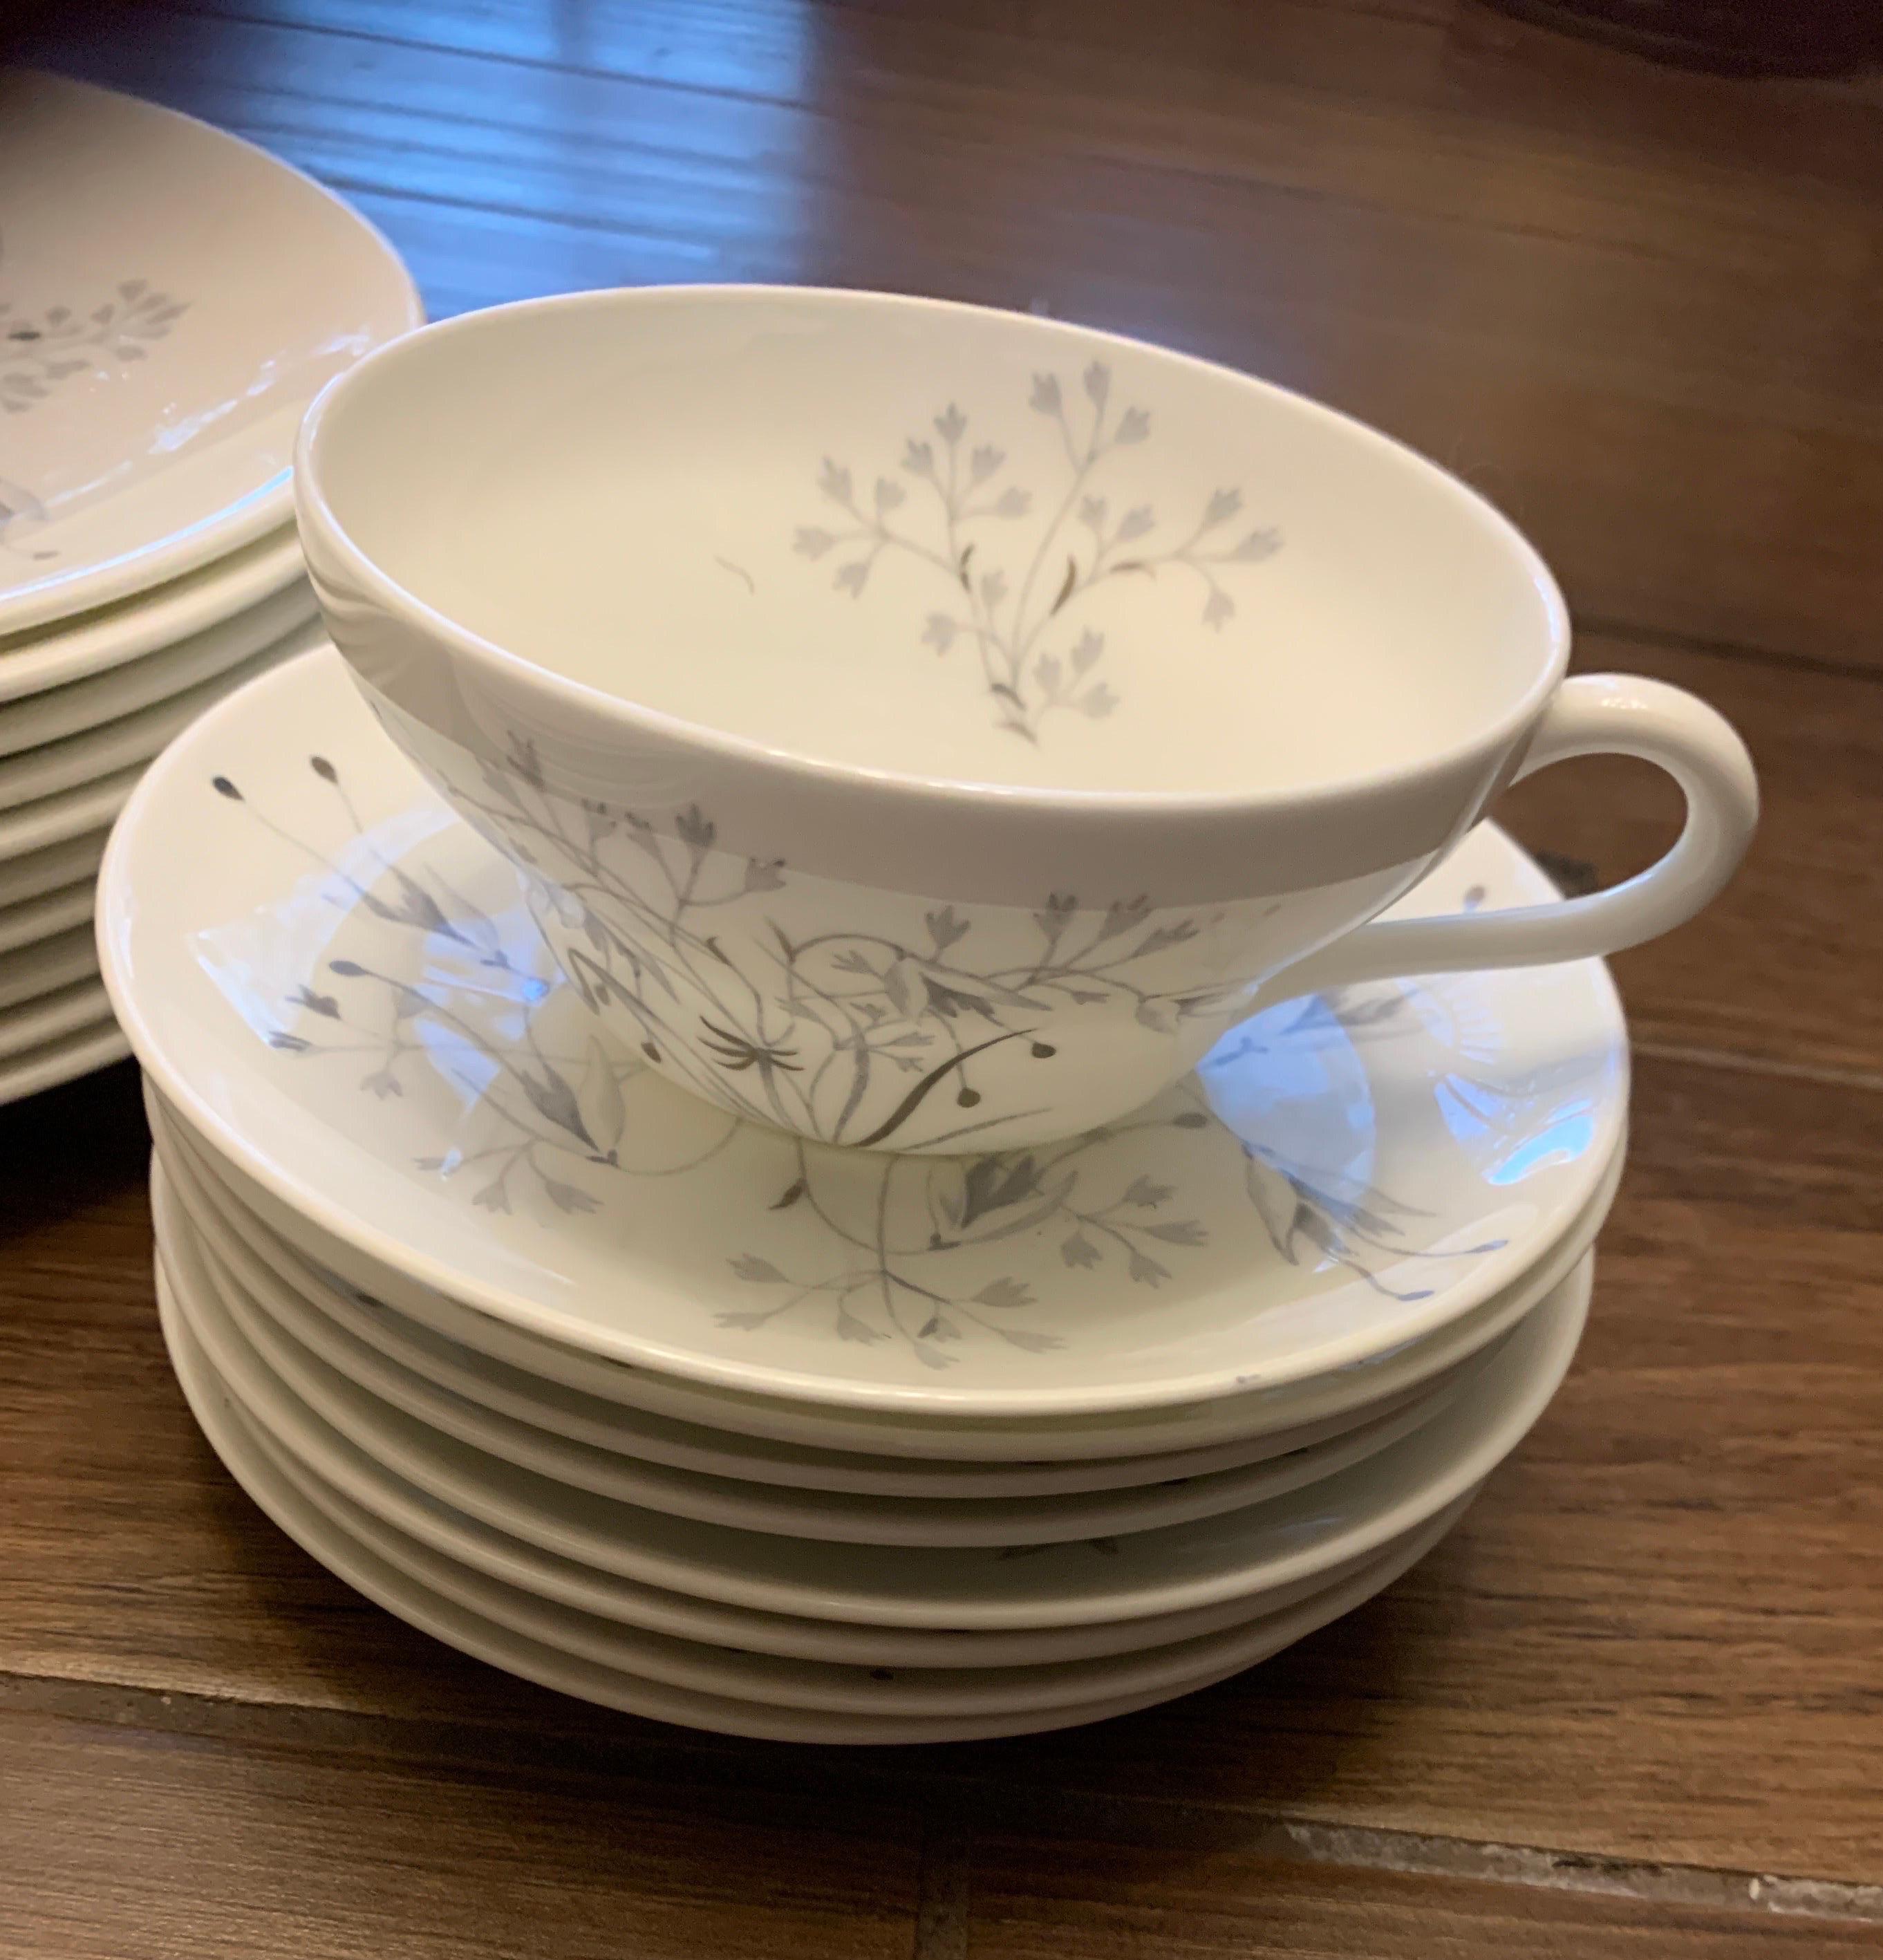 Wedgewood England Bone China 65 Piece Service for 8 White & Hand-Paint Platinum In Good Condition For Sale In Palm Springs, CA